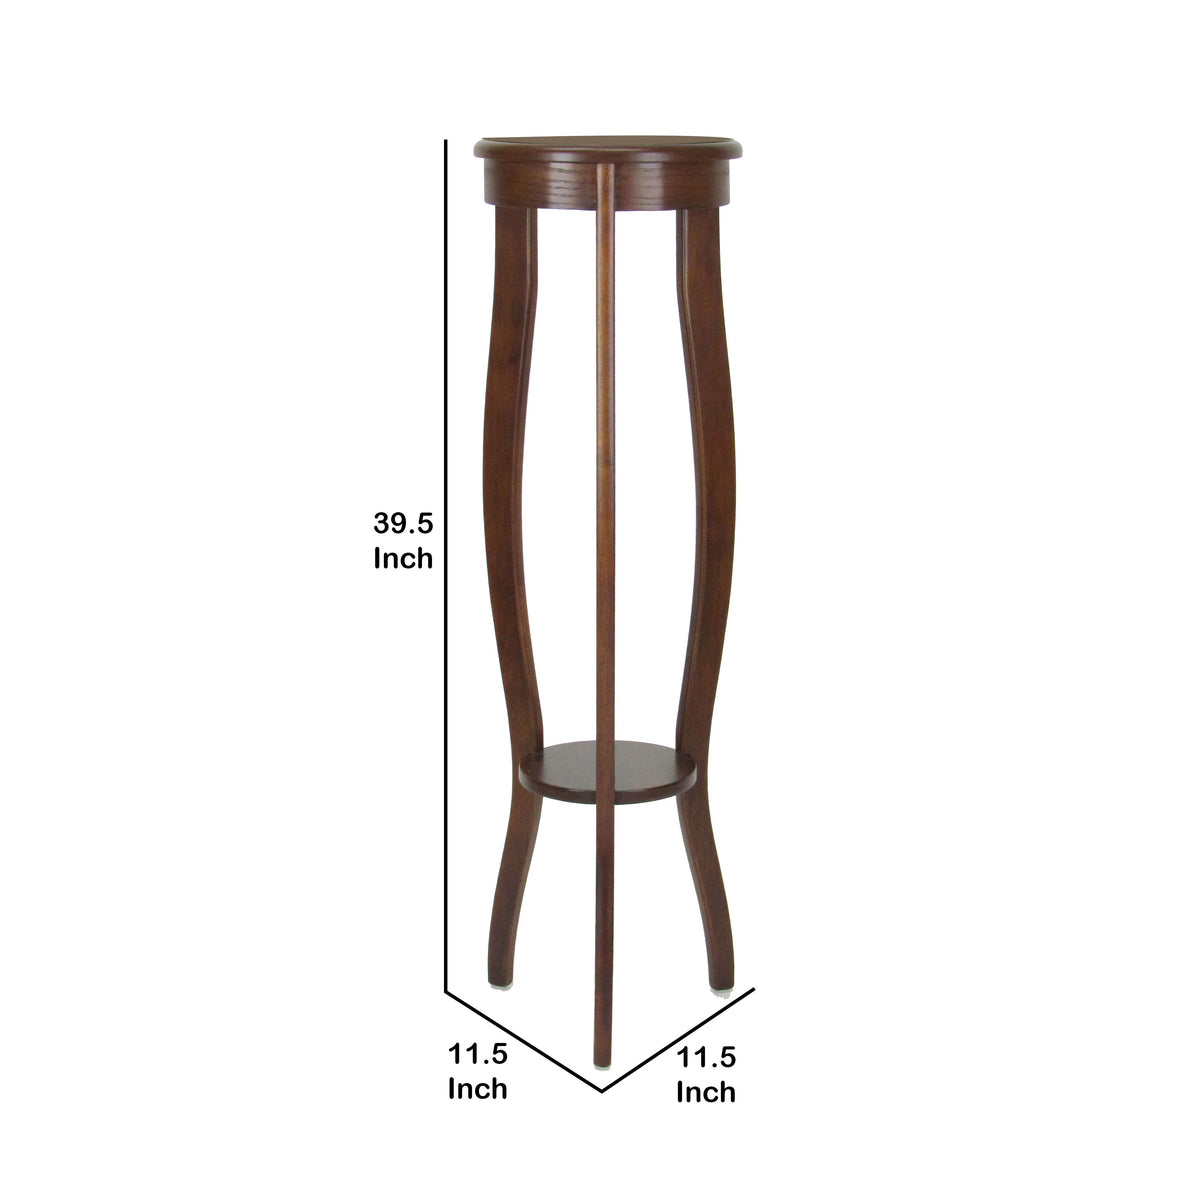 Round Pedestal Stand with Open Bottom Shelf and Flared Legs, Brown - BM210427